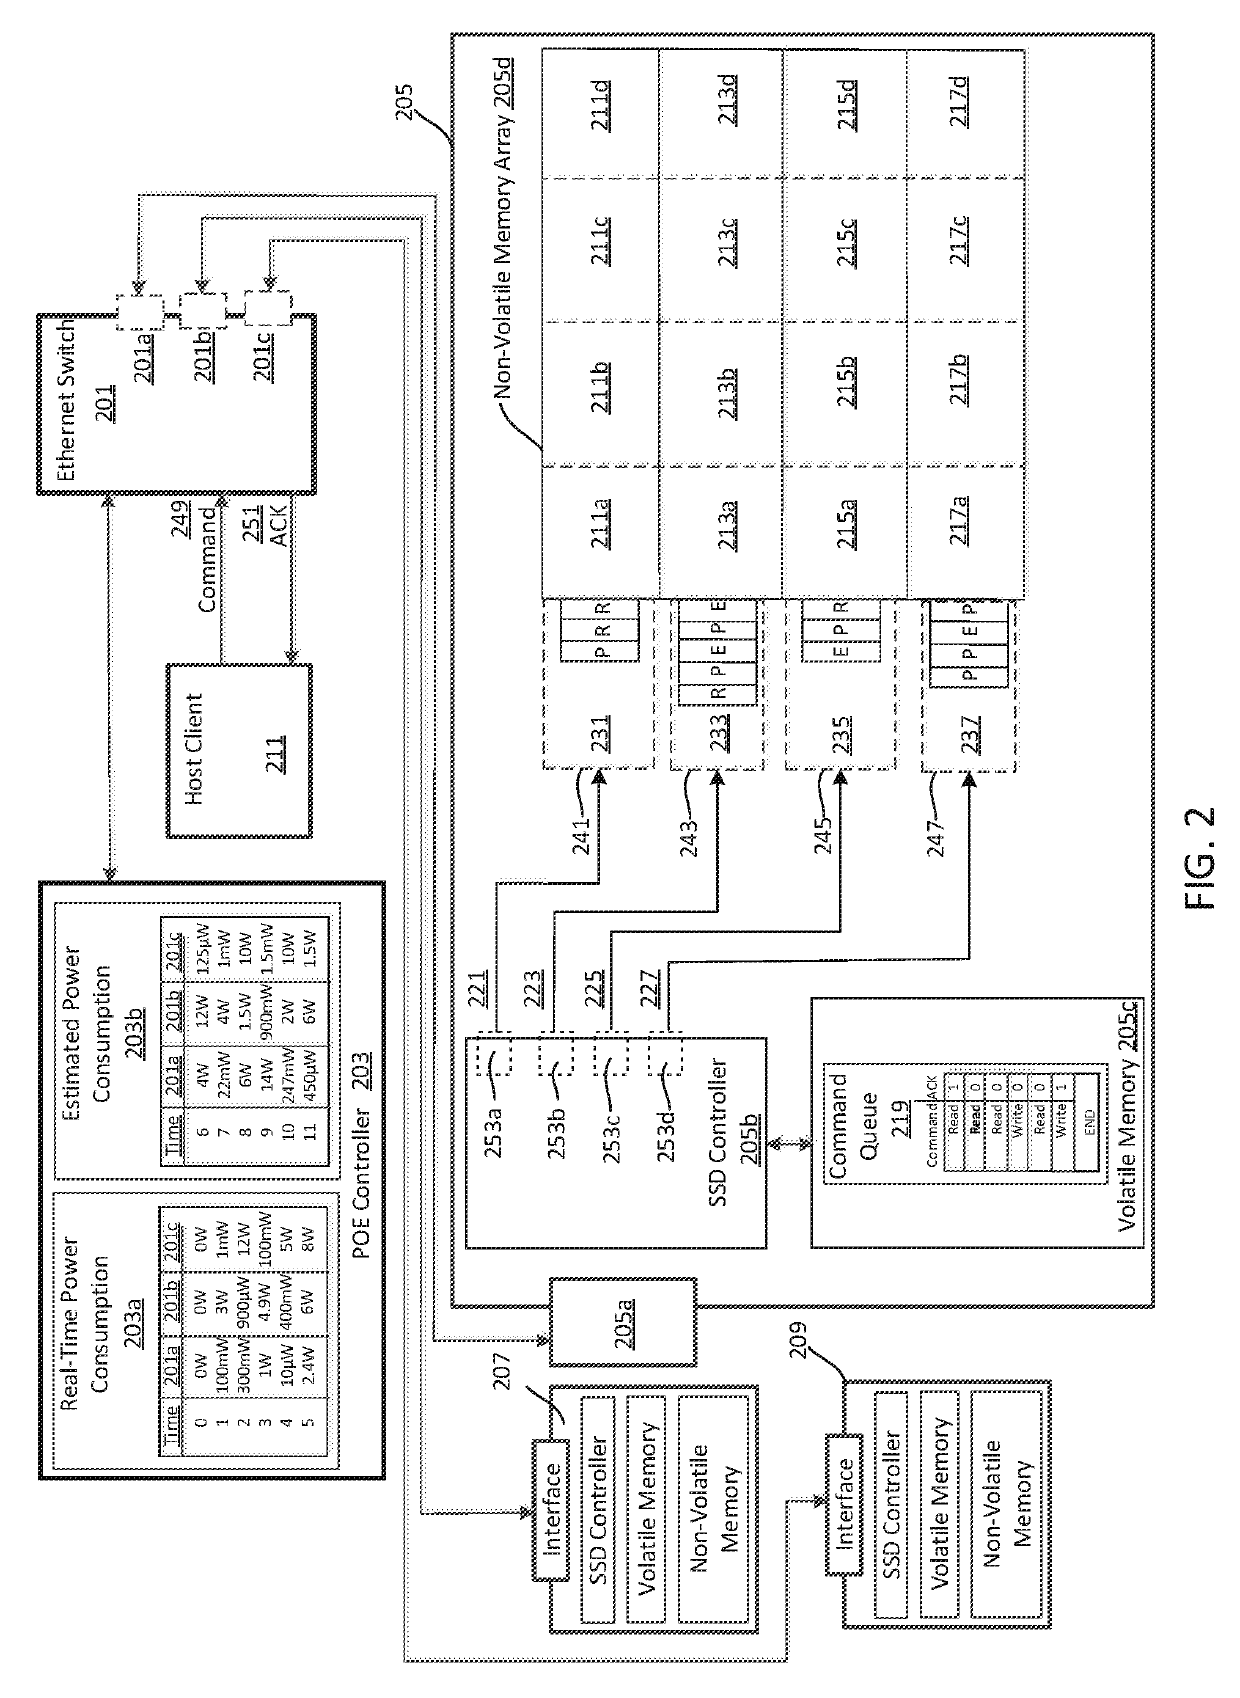 Power management for solid state drives in a network